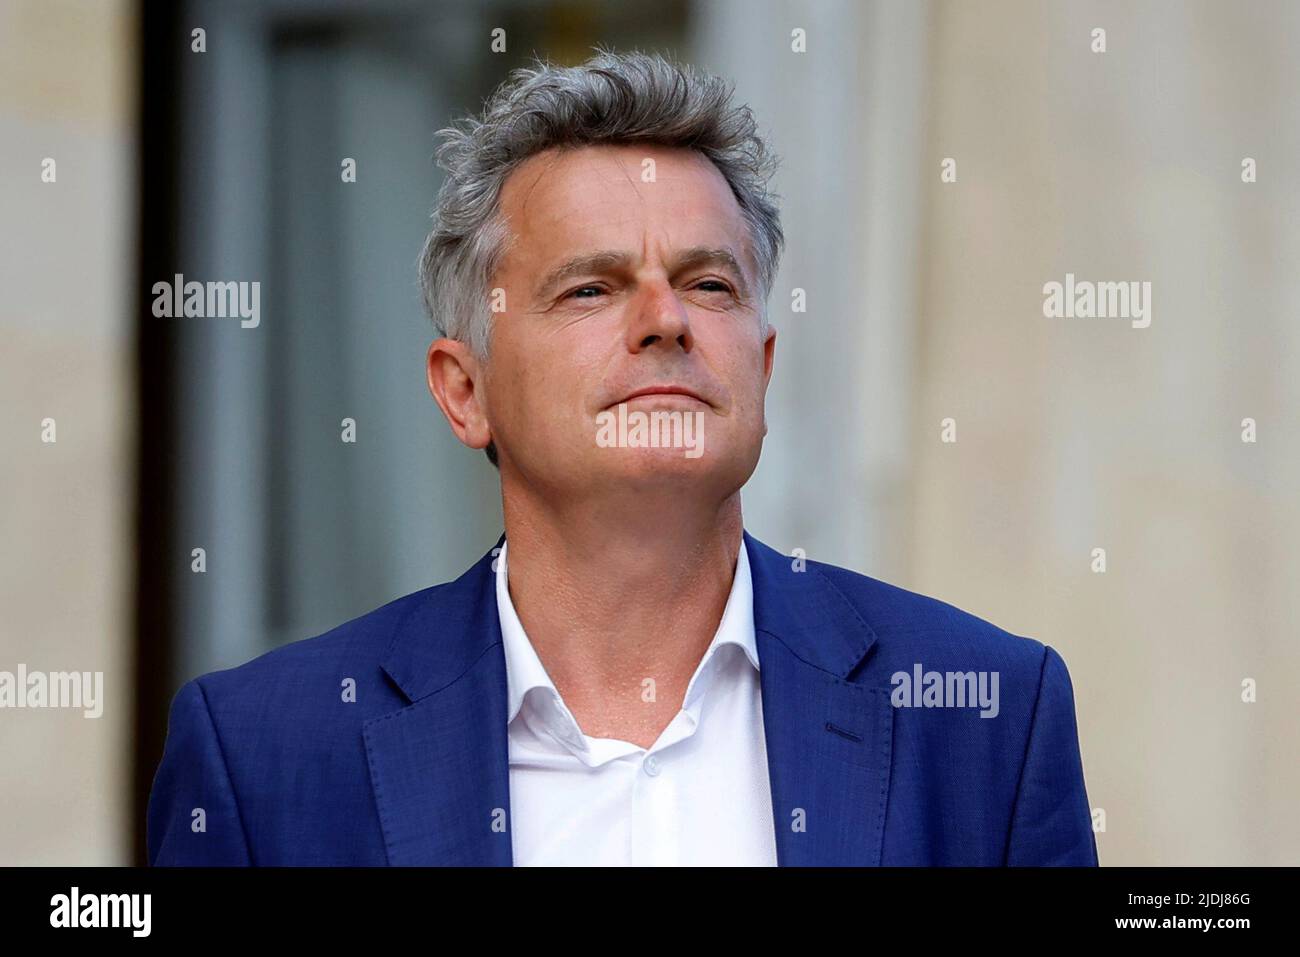 Fabien Roussel, French communist party (PCF) National Secretary,  arrives for a meeting with the French President at the Elysee Palace in Paris, France, June 21, 2022. REUTERS/Sarah Meyssonnier Stock Photo